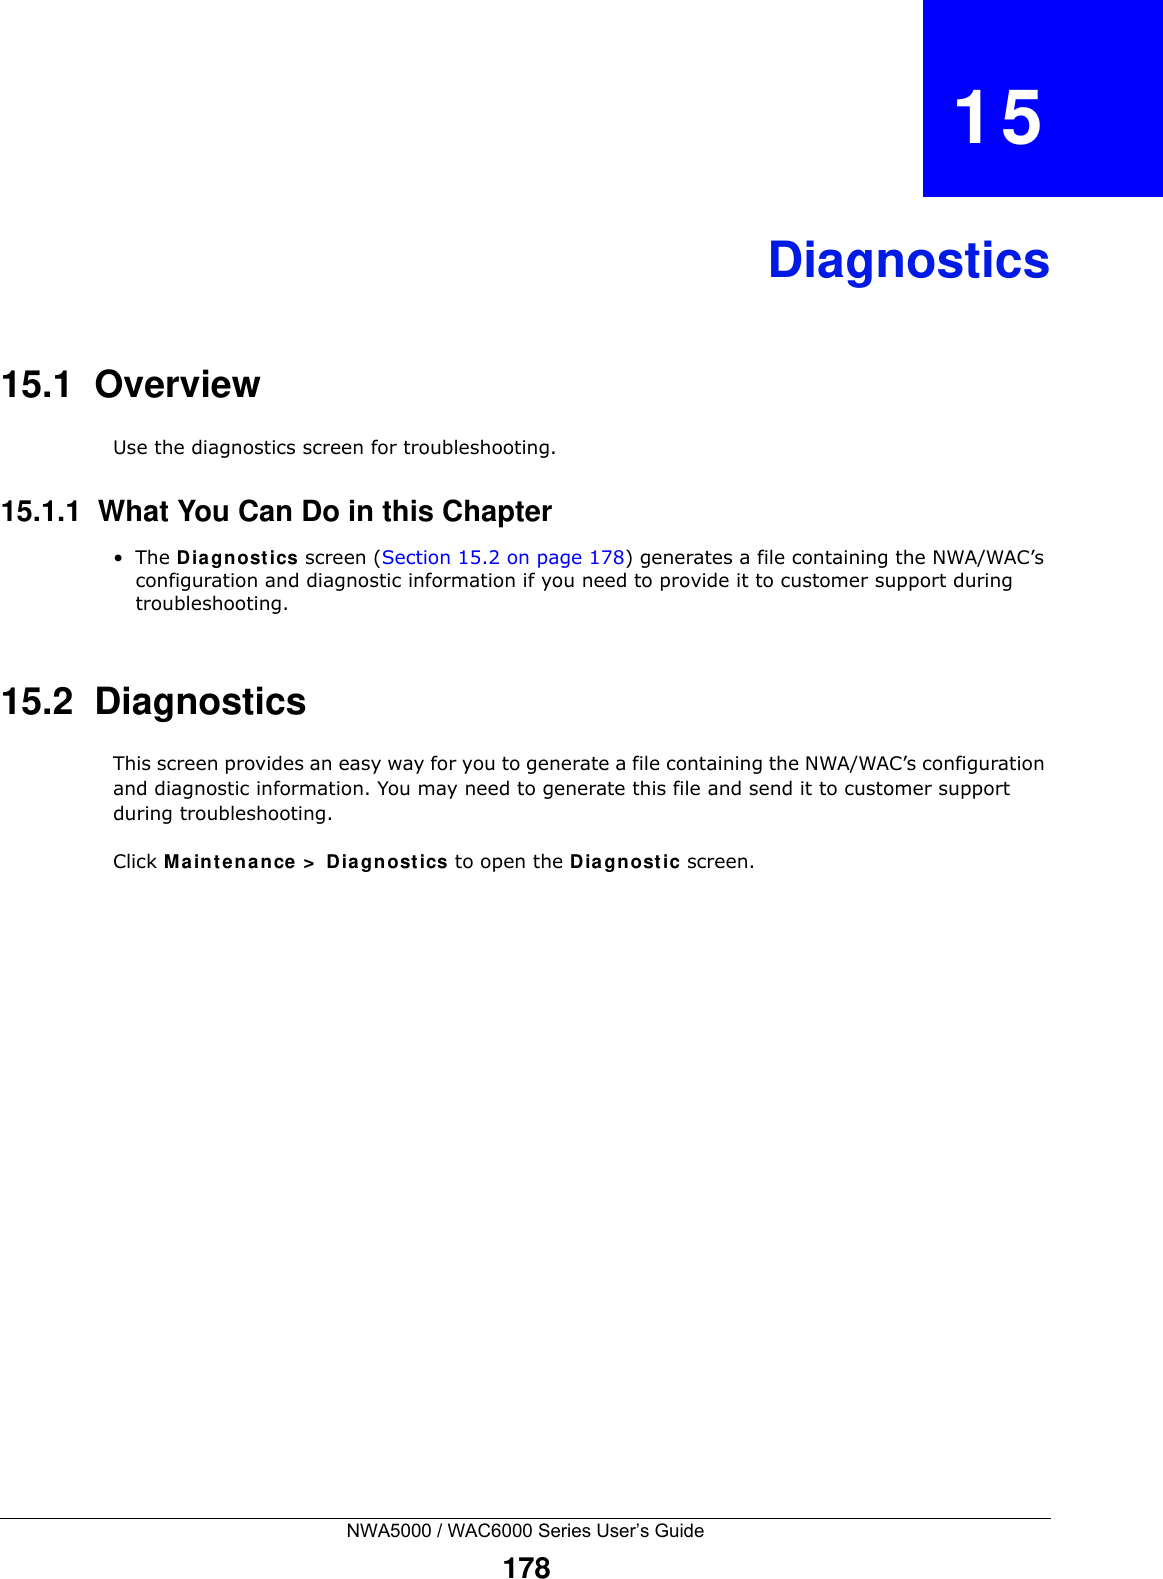 NWA5000 / WAC6000 Series User’s Guide178CHAPTER   15Diagnostics15.1  OverviewUse the diagnostics screen for troubleshooting. 15.1.1  What You Can Do in this Chapter•The Diagnostics screen (Section 15.2 on page 178) generates a file containing the NWA/WAC’s configuration and diagnostic information if you need to provide it to customer support during troubleshooting.15.2  Diagnostics This screen provides an easy way for you to generate a file containing the NWA/WAC’s configuration and diagnostic information. You may need to generate this file and send it to customer support during troubleshooting.Click Maintenance &gt; Diagnostics to open the Diagnostic screen. 